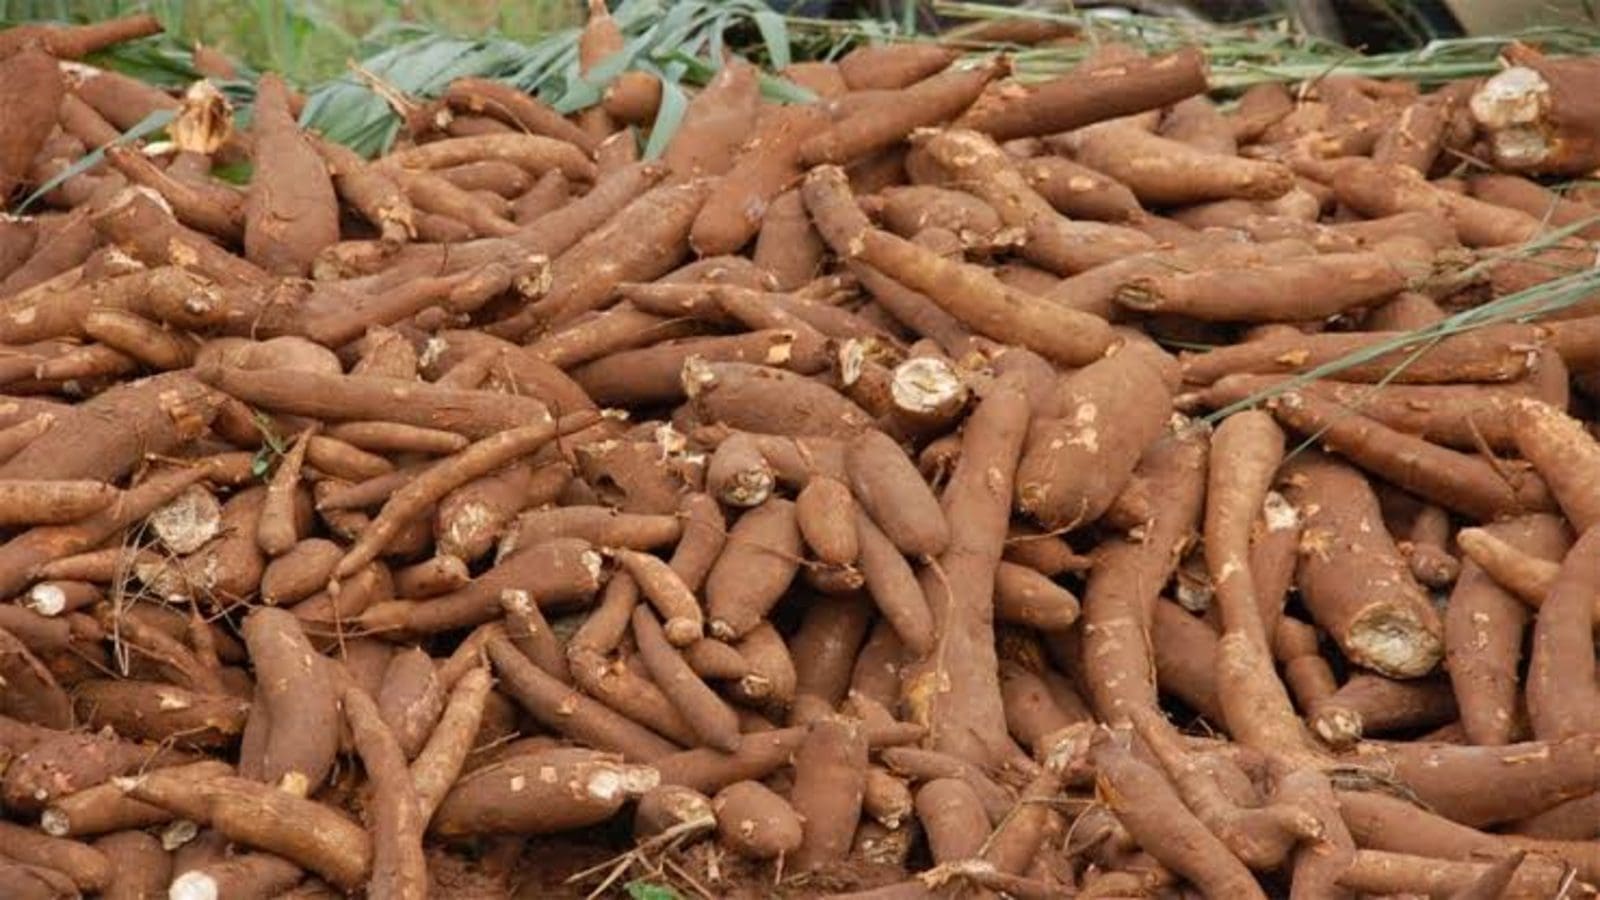 Madagascar projects to produce 7 million tons of cassava by 2027